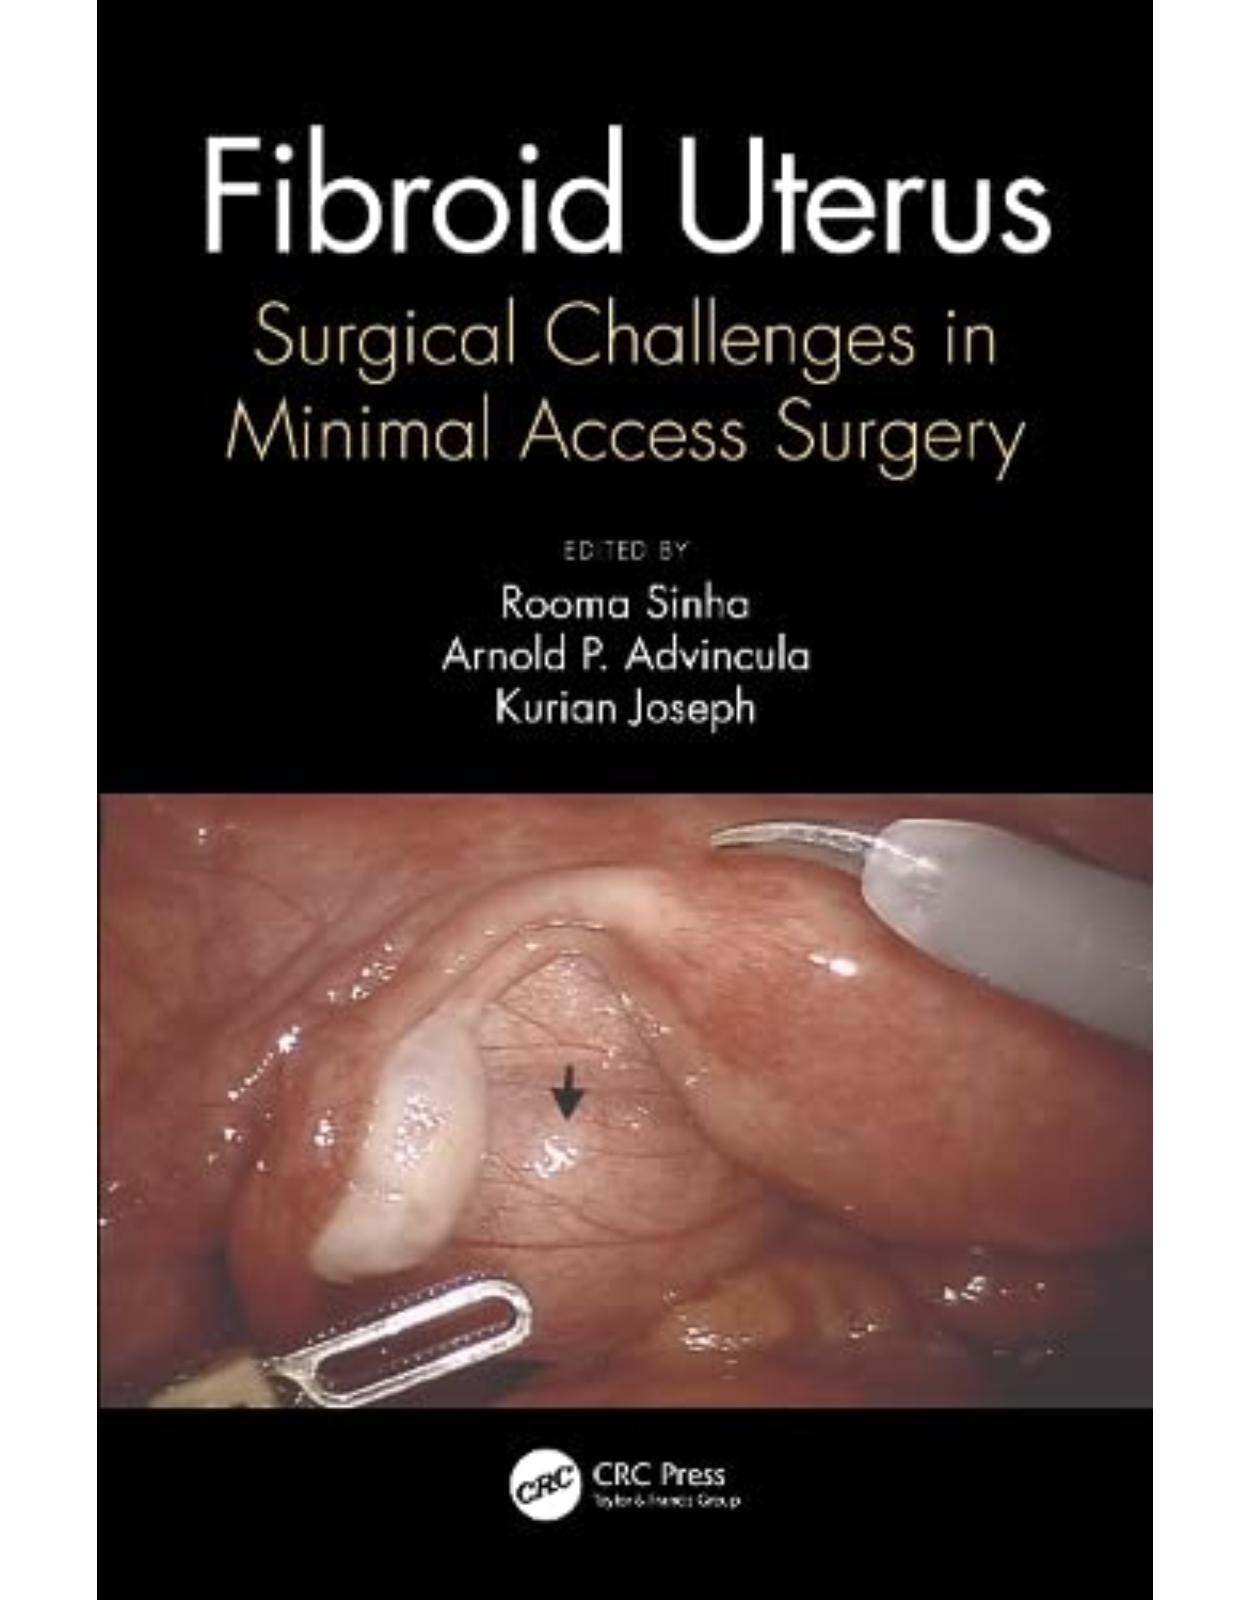 Fibroid Uterus: Surgical Challenges in Minimal Access Surgery